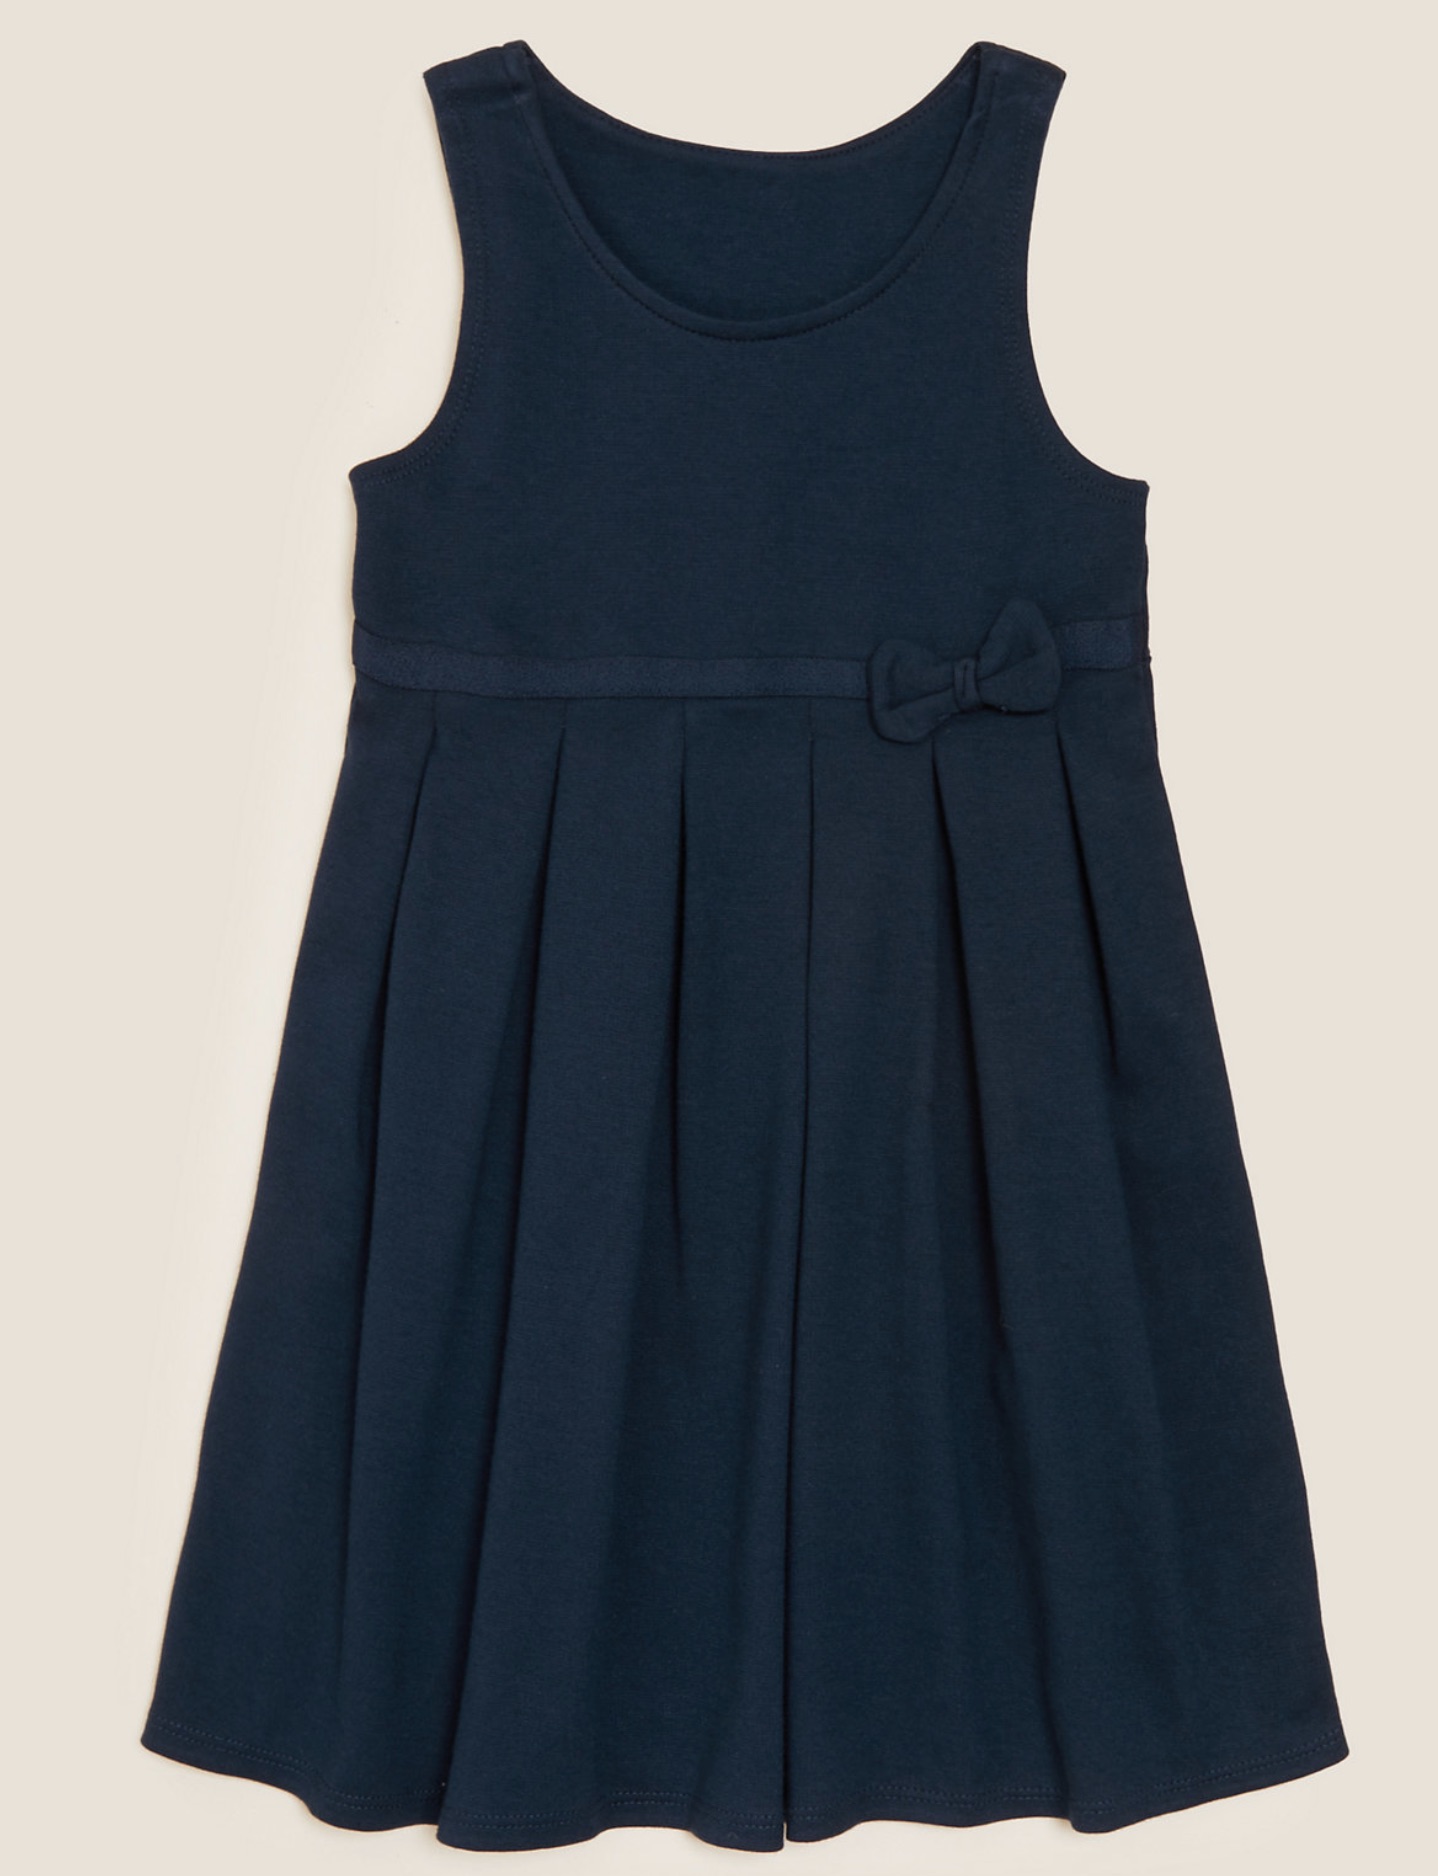 Girls' Navy Jersey Pinafore Dress, Pleated/Gathered Waist, 11-12Y